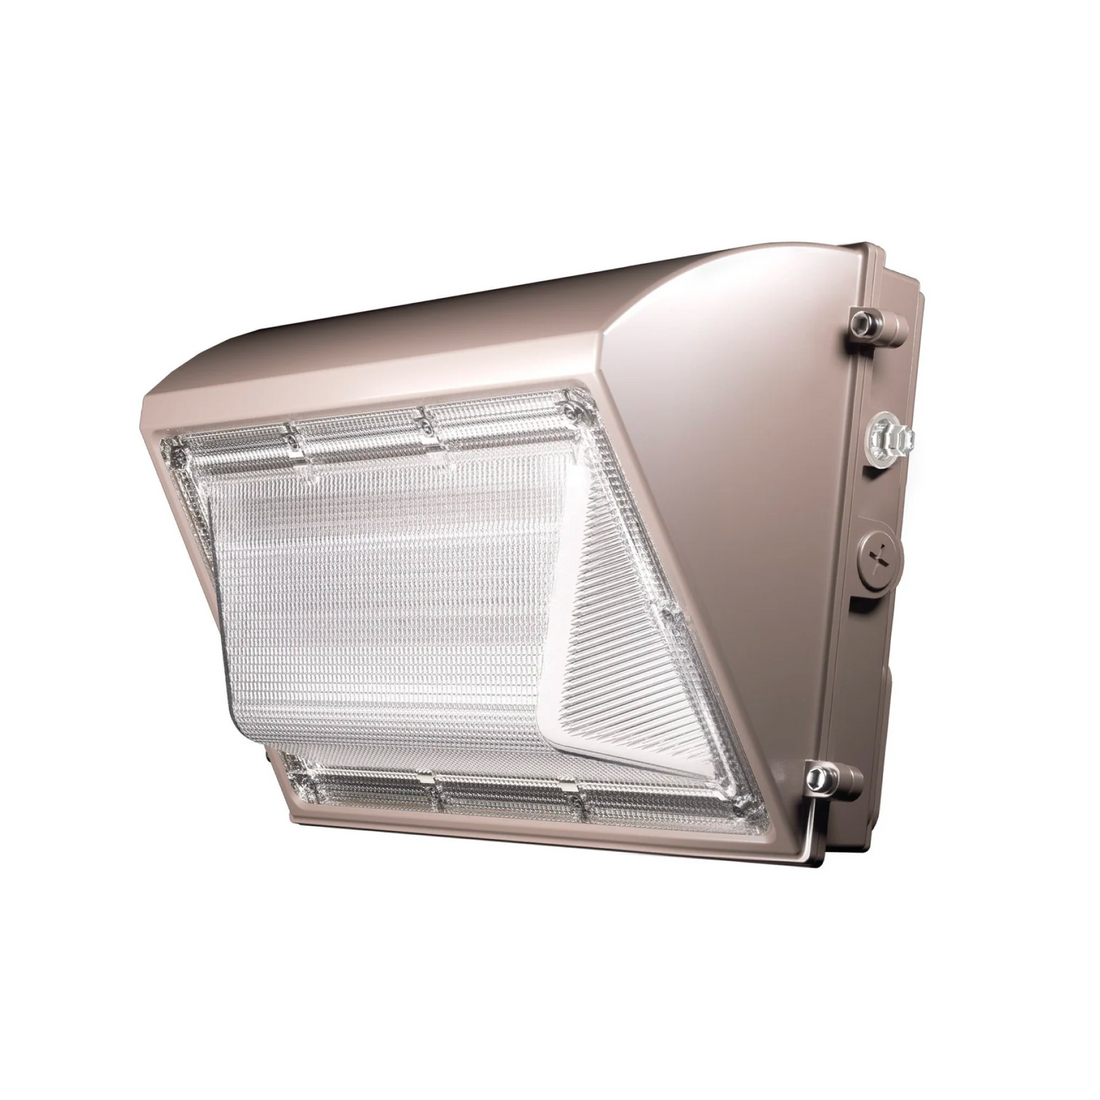 LED Wall Pack Light with Photocell 120W 14400LM ,5000K,100-277V Outdoor Commercial Security Light